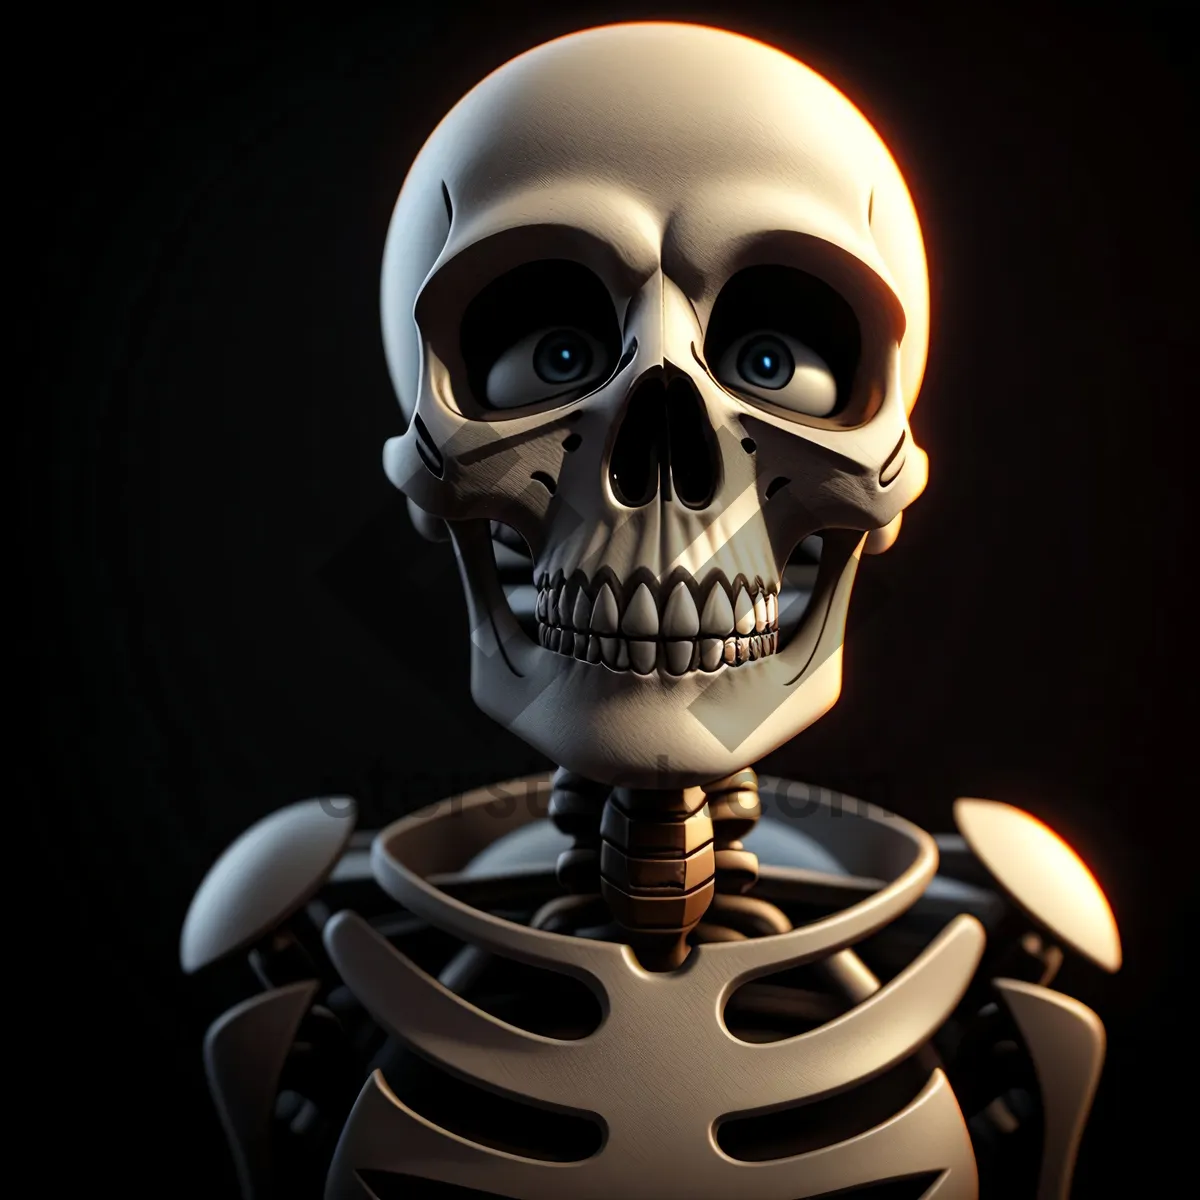 Picture of Pirate Skull Sculpture: Bone-Chilling Anatomy of Fear